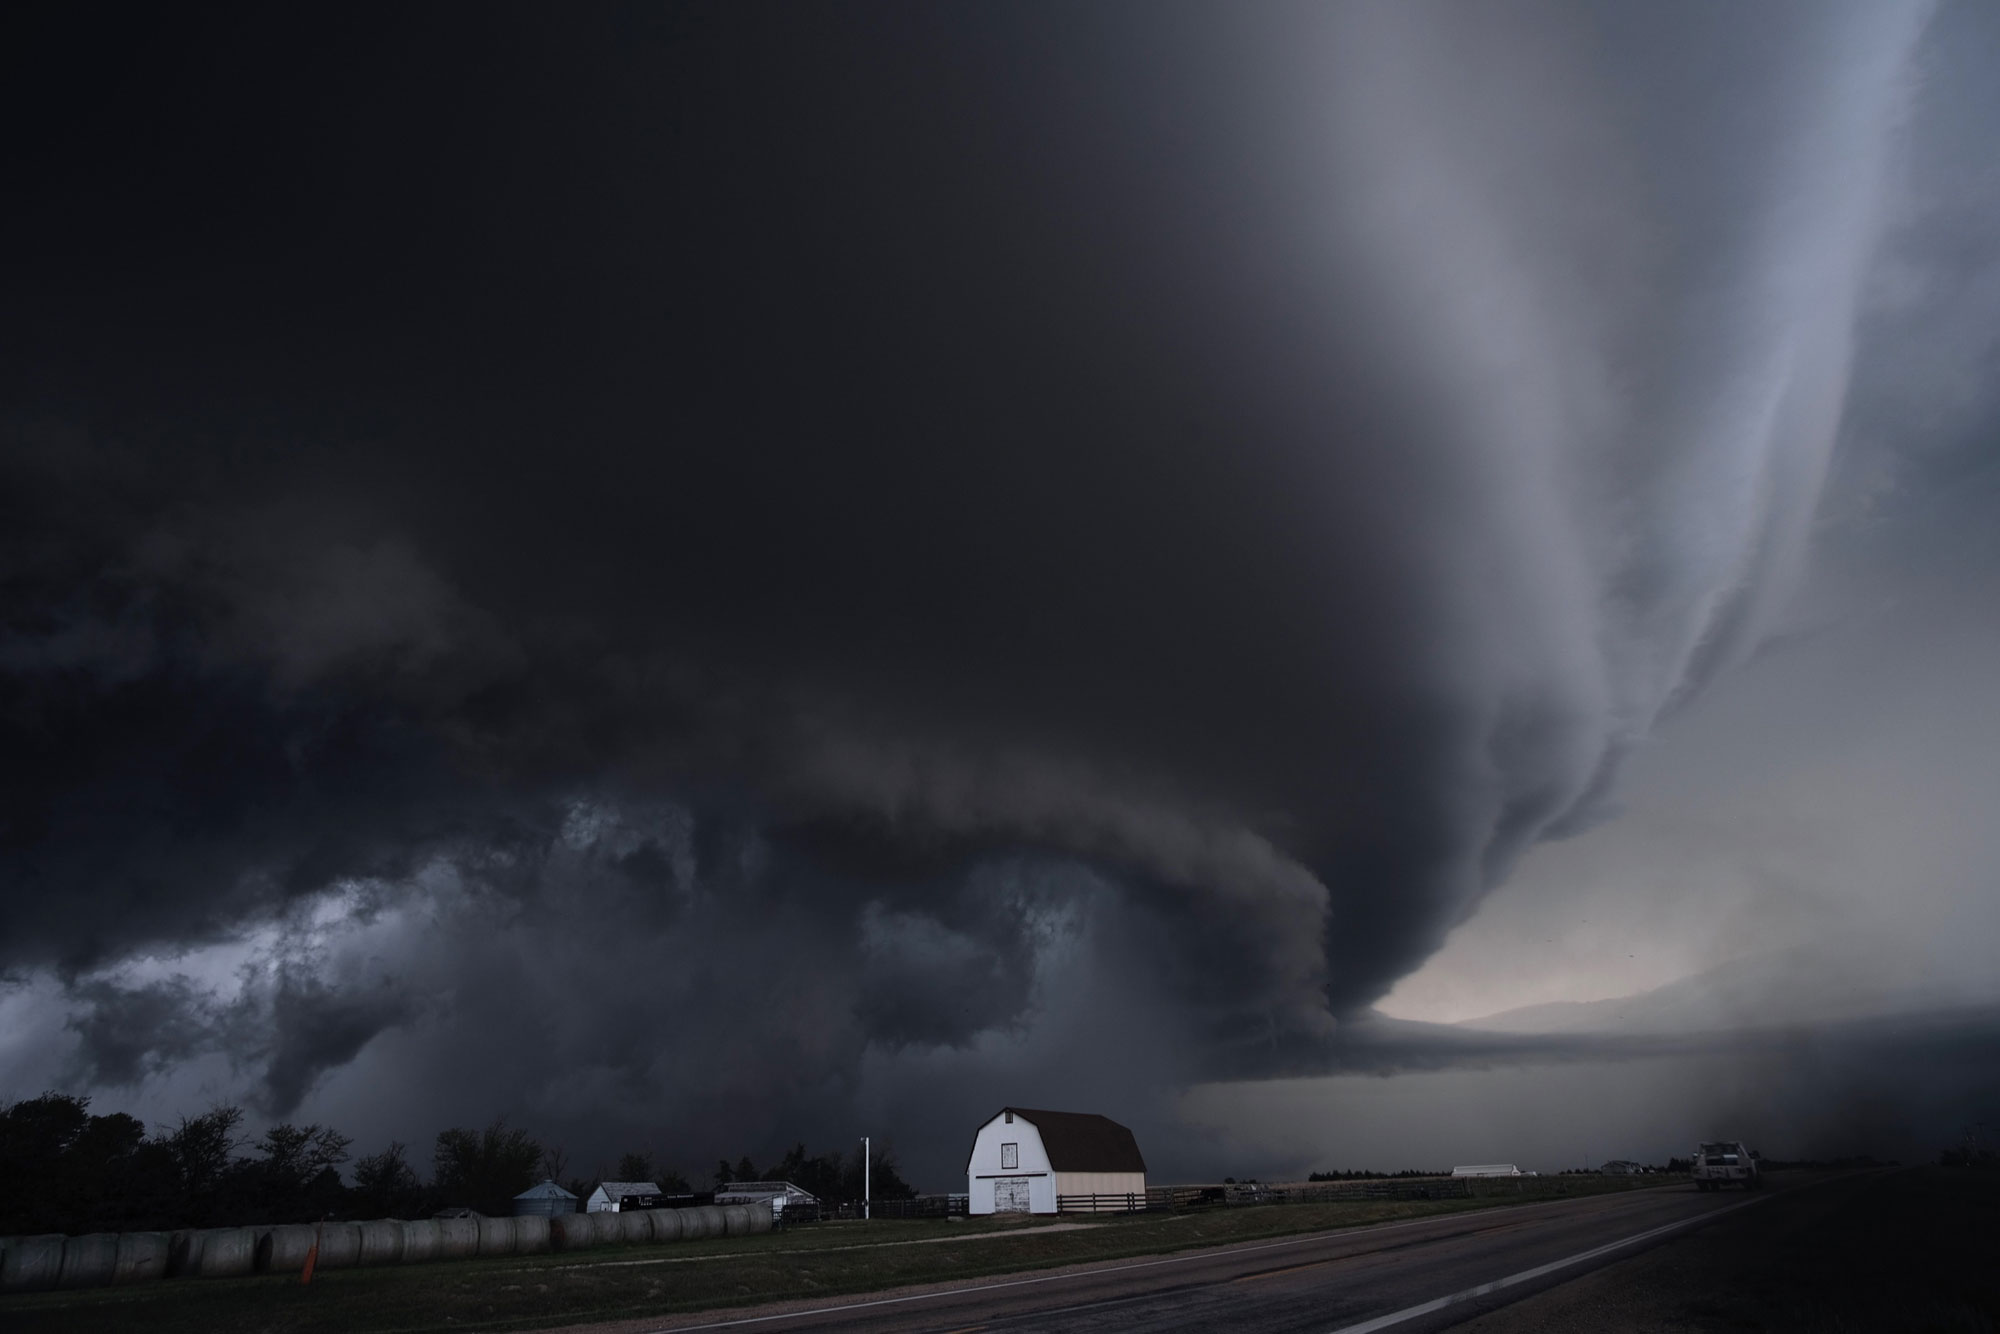 Photo of a supercell storm in Kansas. The photo shows a low-hanging dark cloud over a white barn next to a paved road.